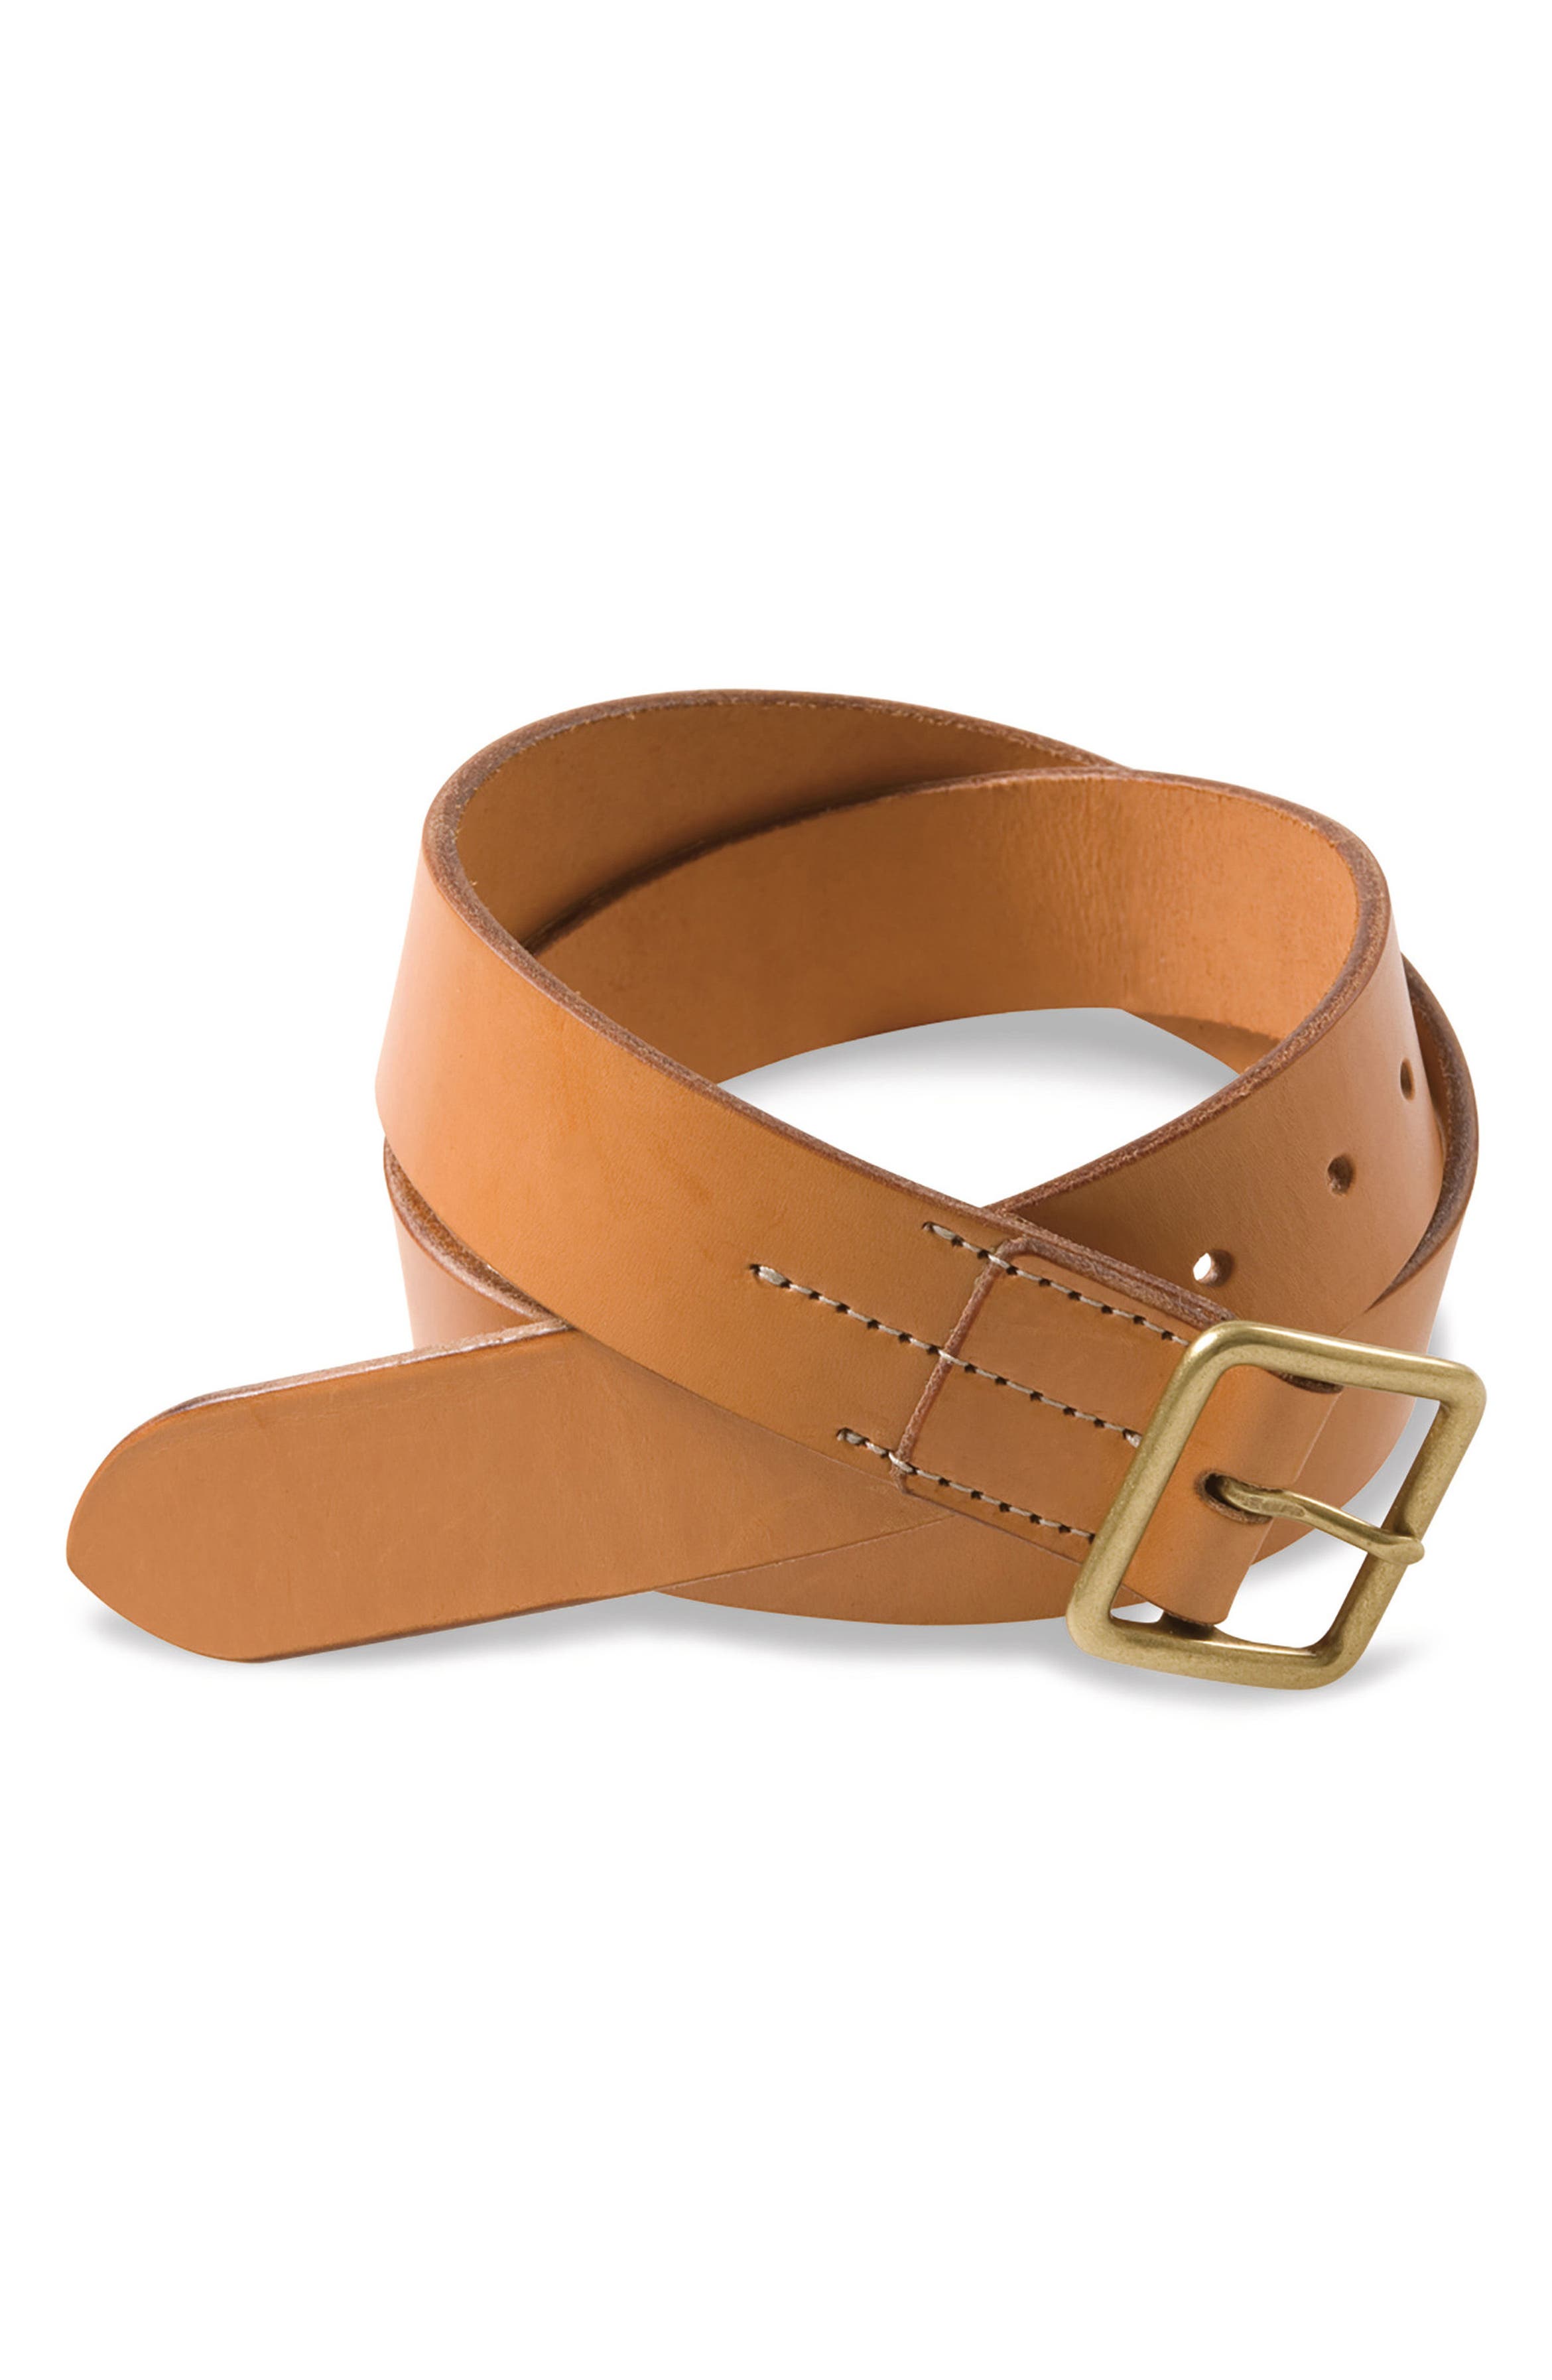 Red Wing Leather Belt | Nordstrom